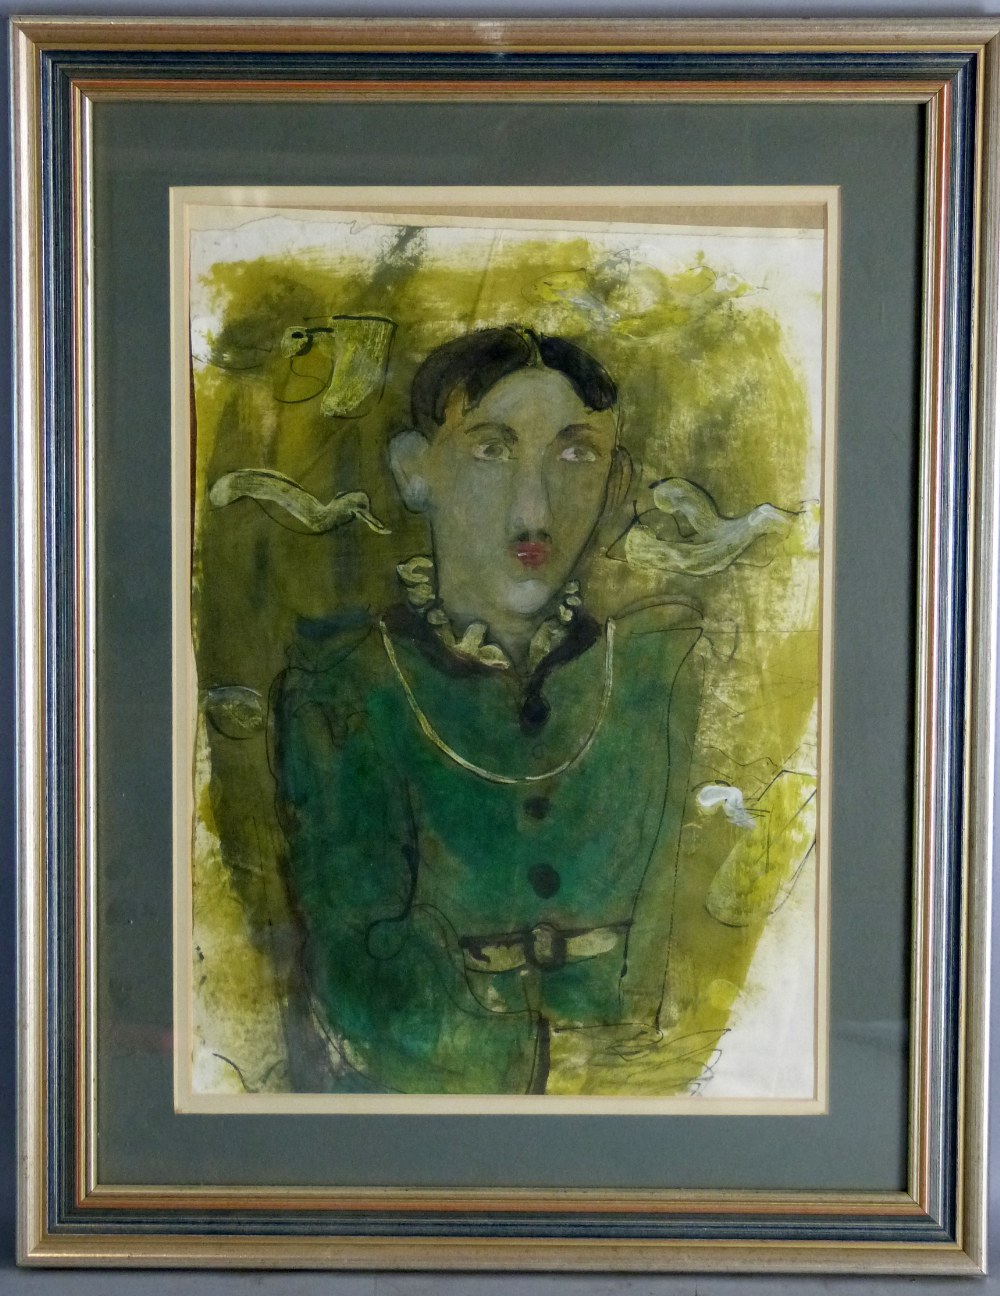 After George Grosz, portrait of a man wearing a green coat, early 20th century, watercolour on - Image 3 of 4